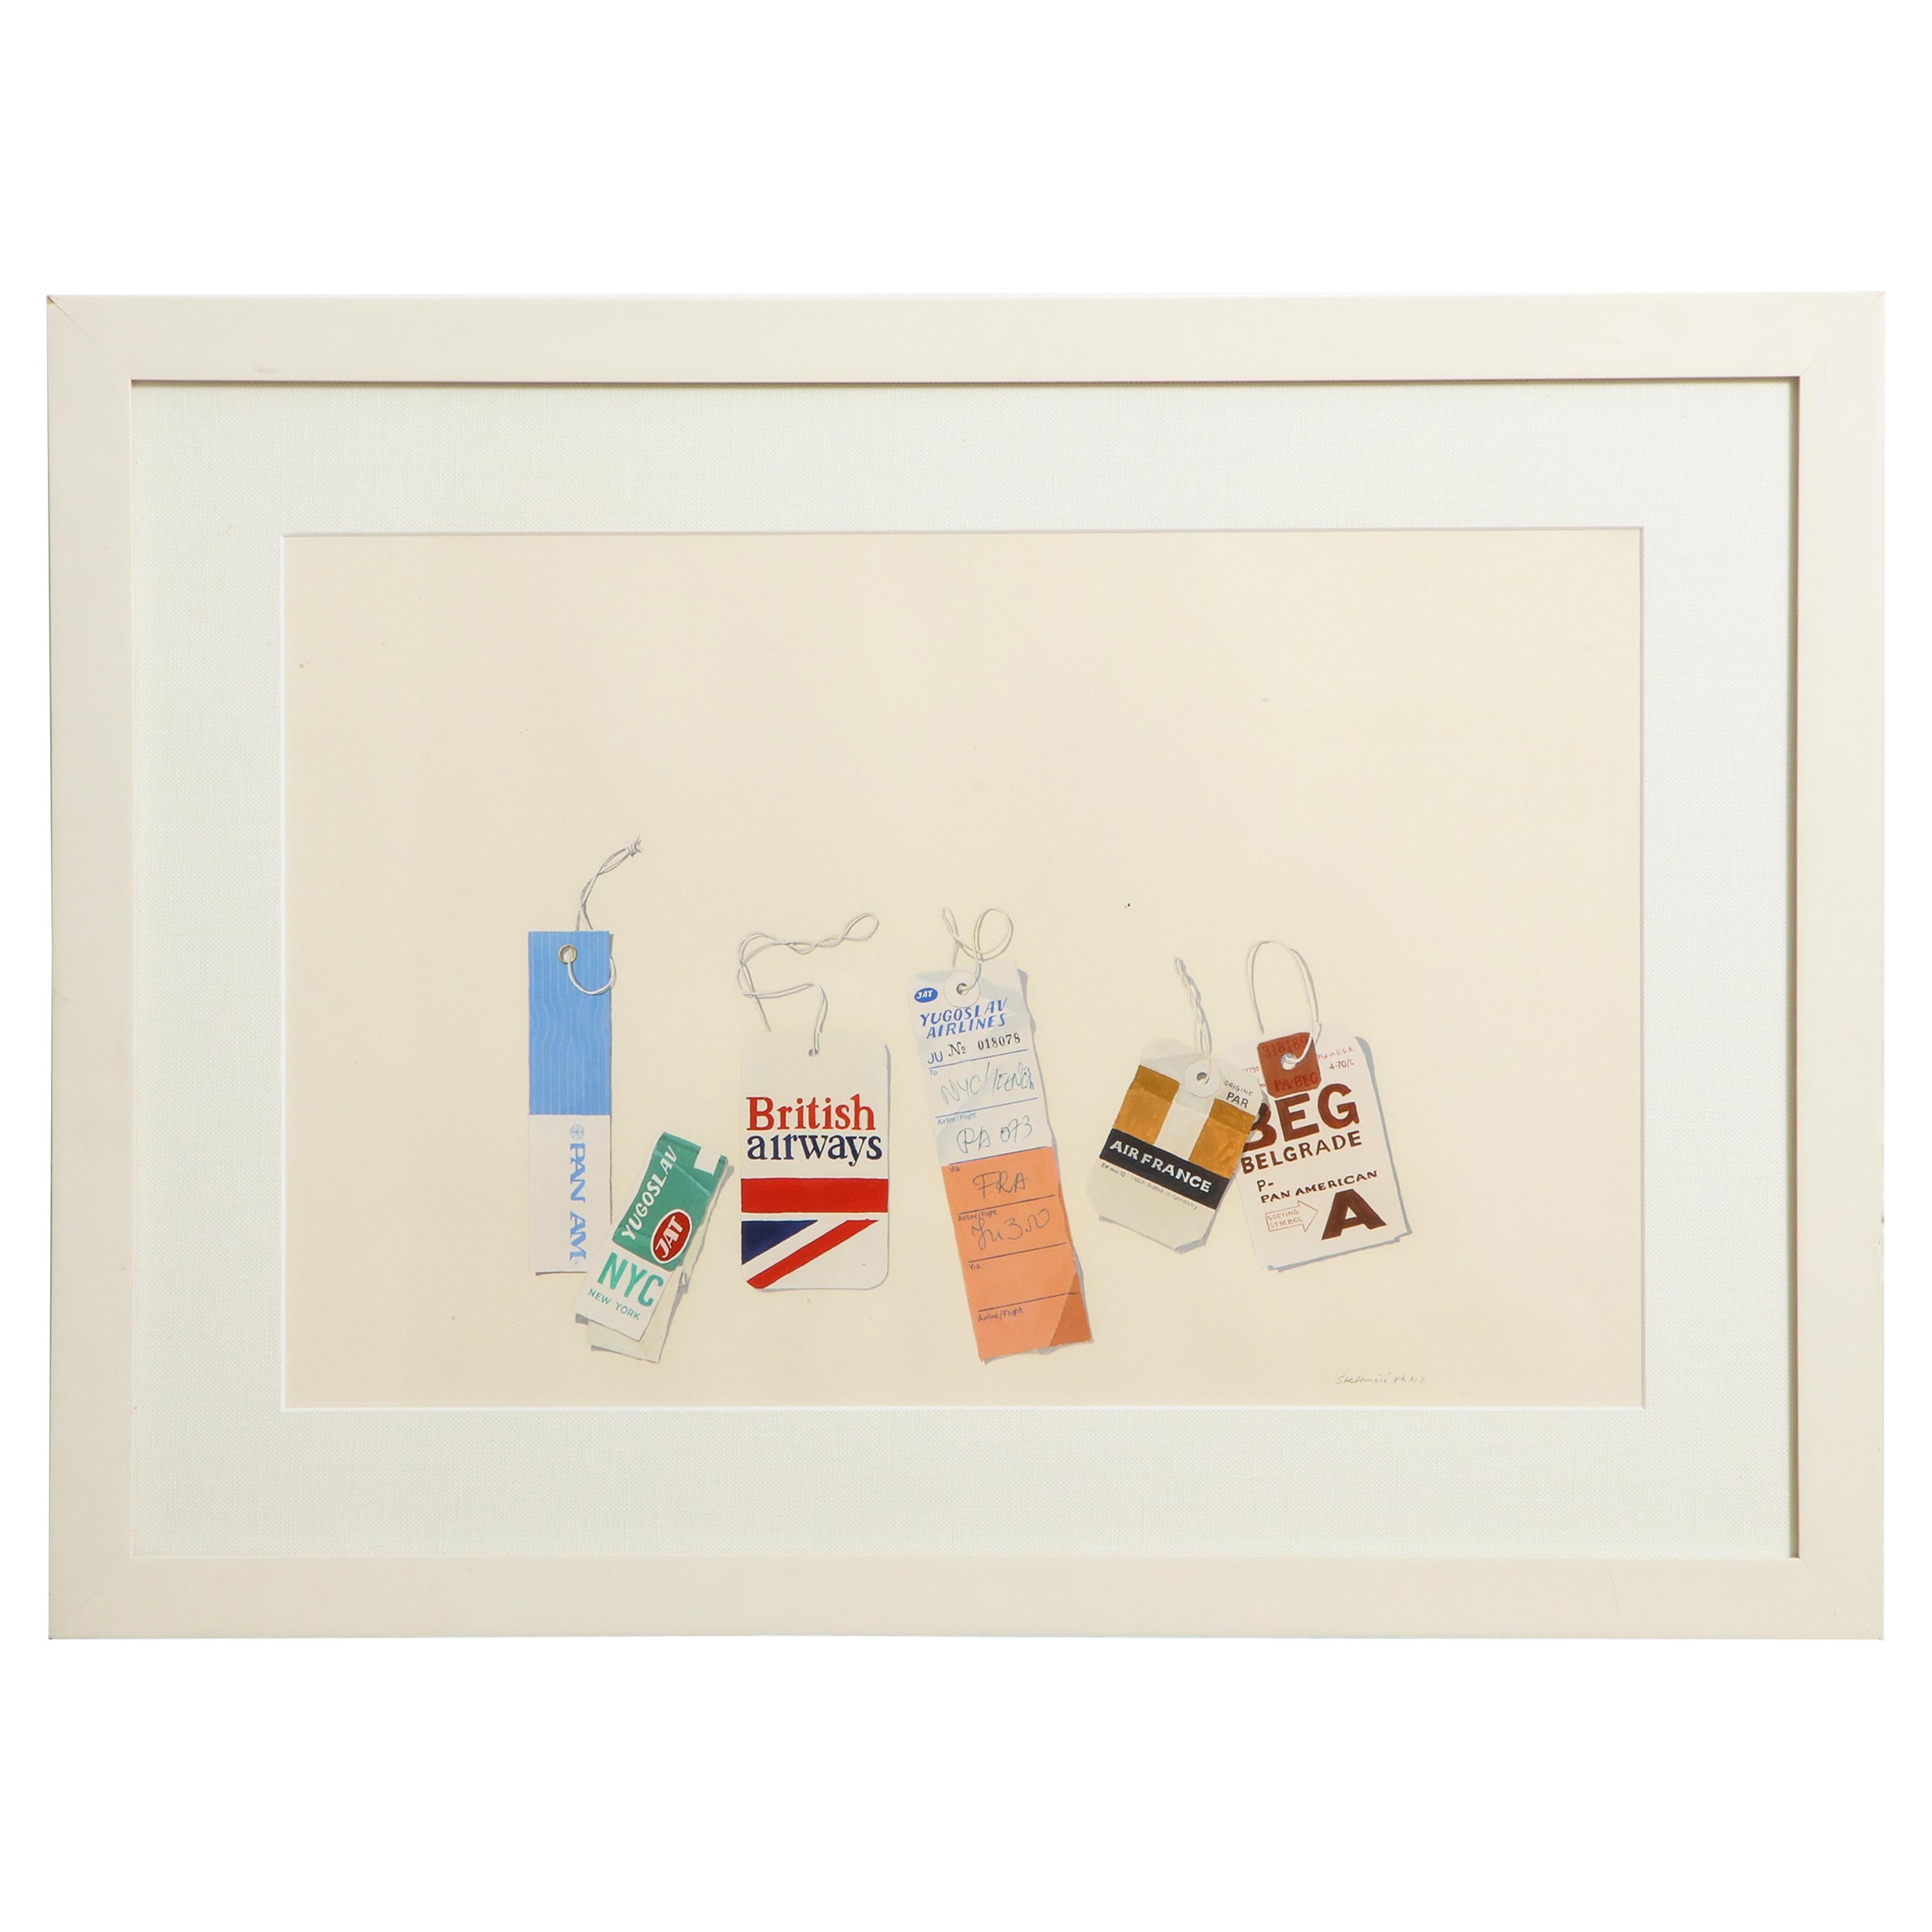 Framed Painting of Luggage Tags by Zarko Stefancic ‘B. 1950’